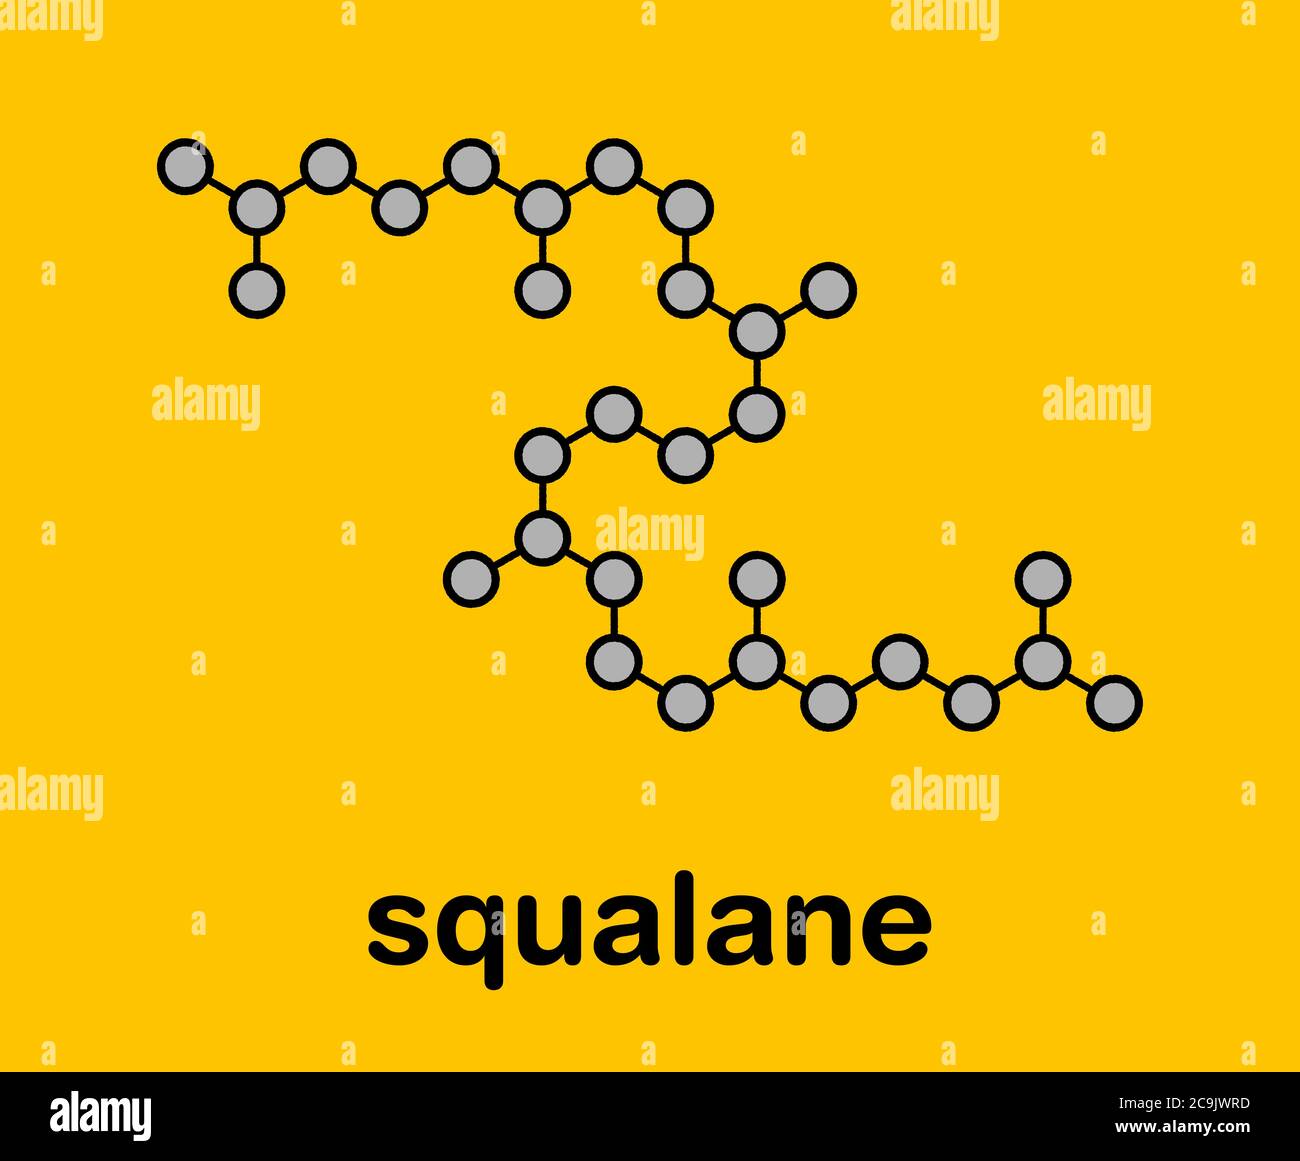 Squalane molecule. Saturated compound, derived from squalene. Used in cosmetics as emollient and moisturizer. Stylized skeletal formula (chemical stru Stock Photo